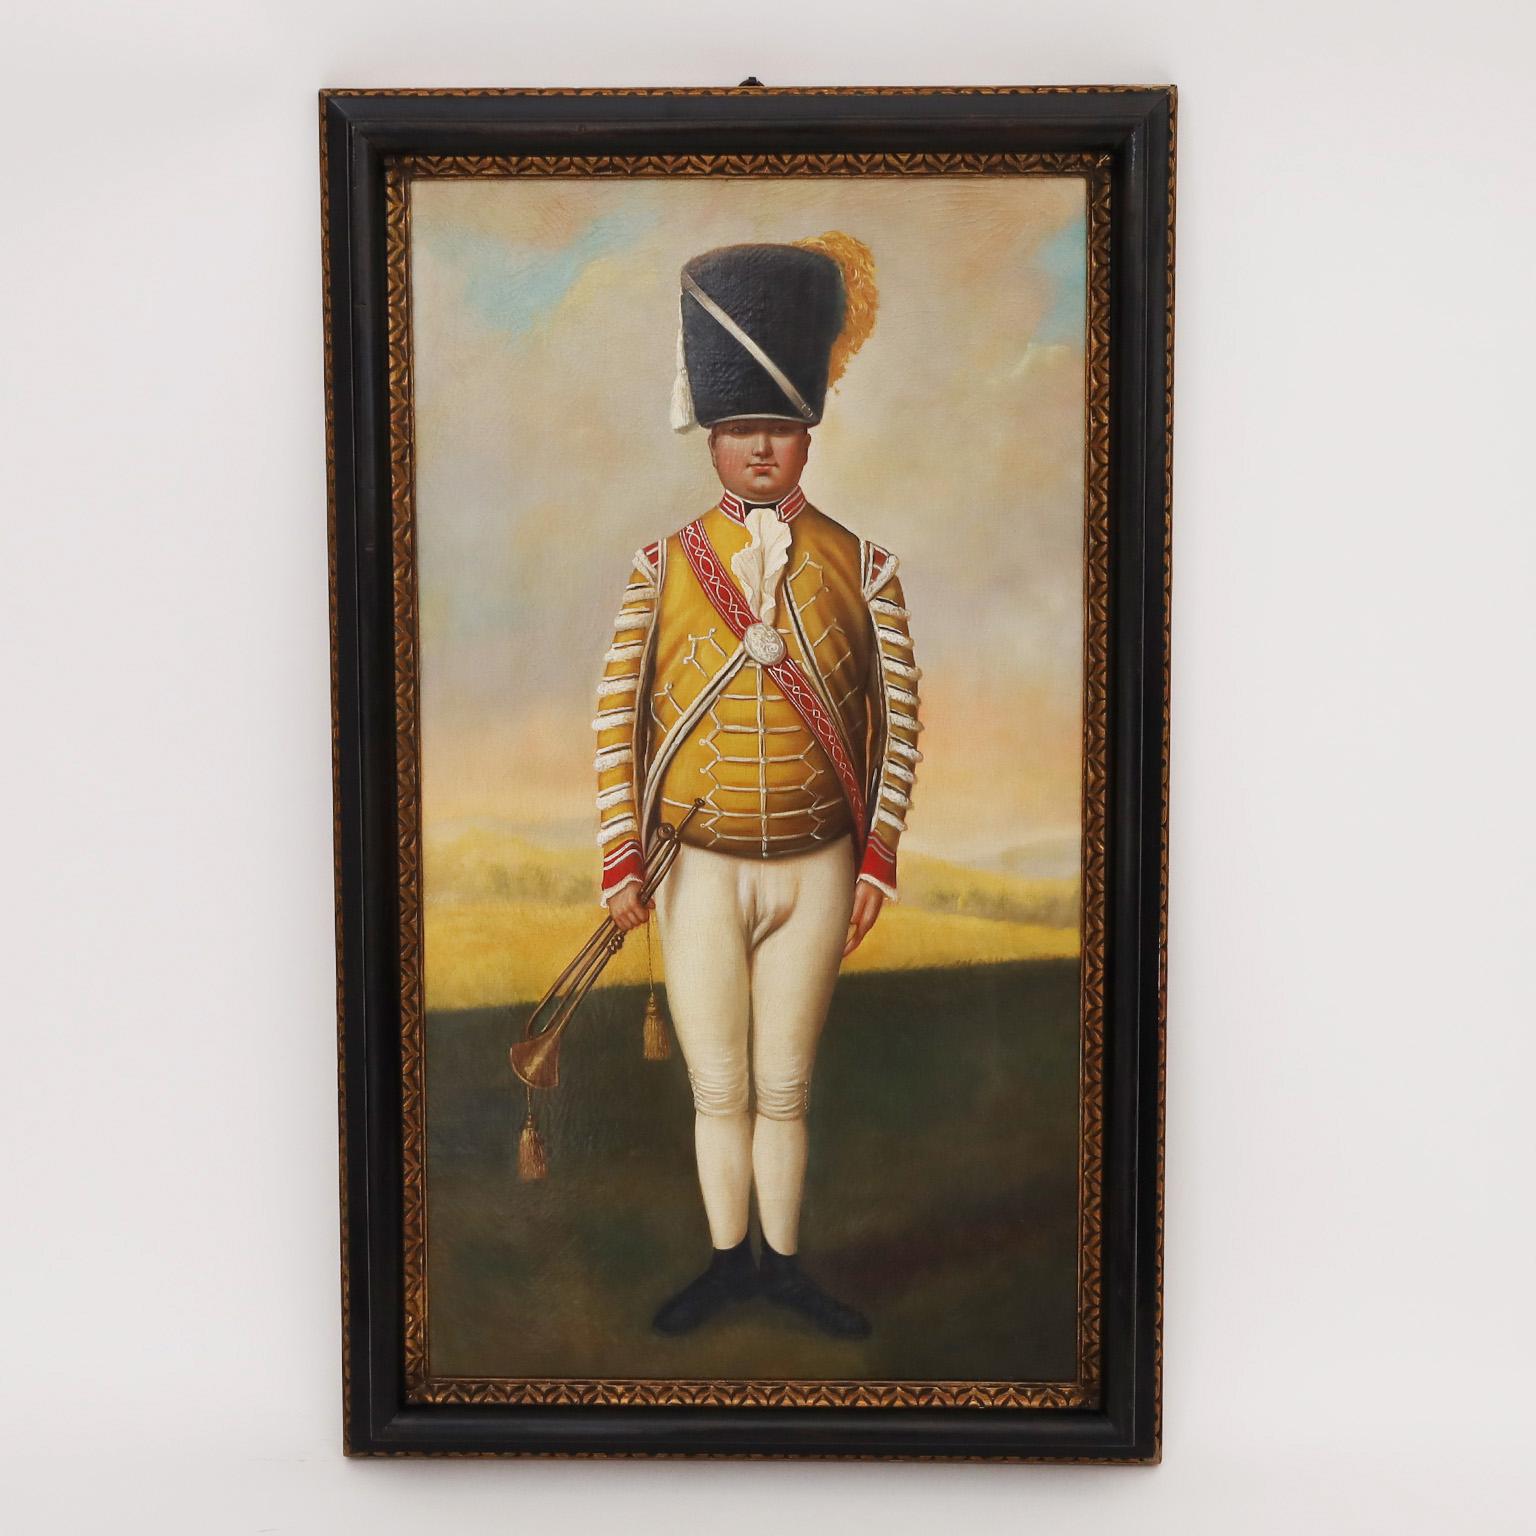 Transporting pair of 19th century oil paintings on canvas depicting two young 18th century soldiers or Grenediers modeling their colorful new uniforms in landscape settings. Presented in the original carved wood ebonized and gilt frames.